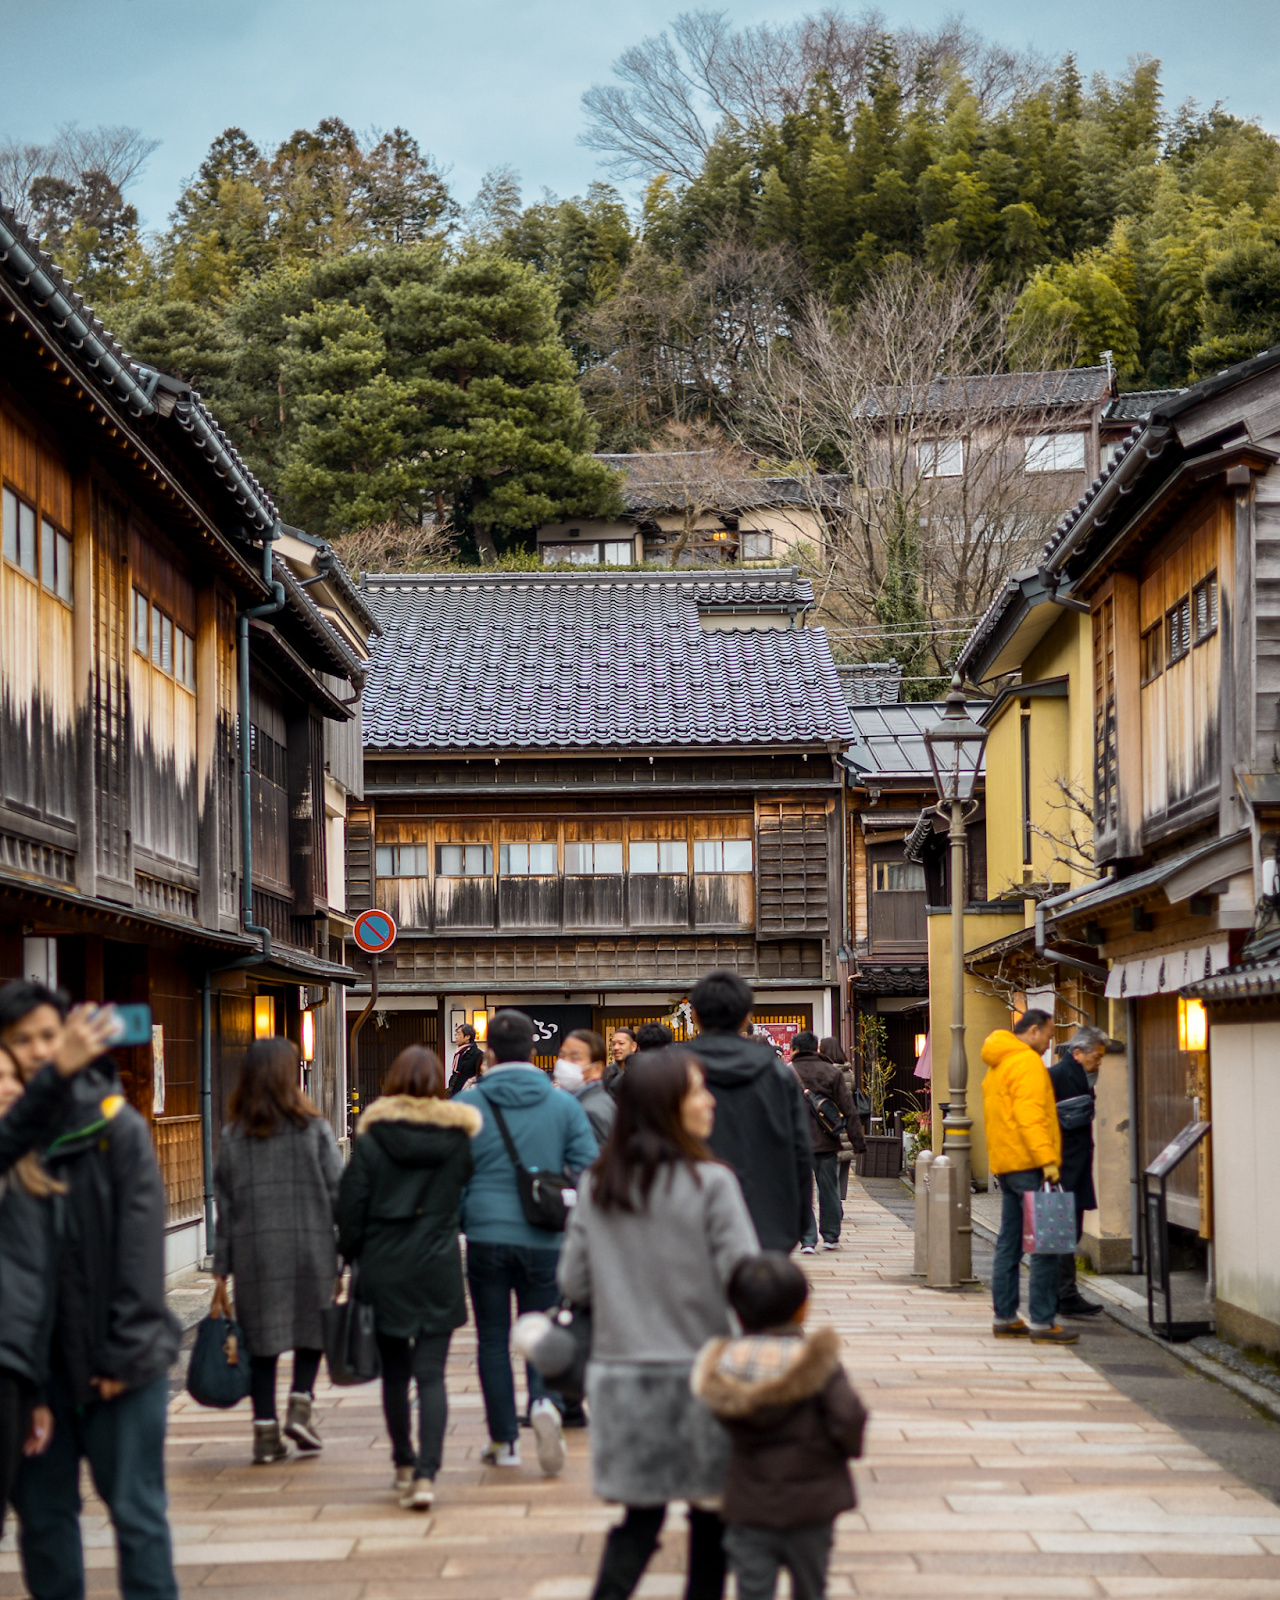 Gold town, Kanazawa trip from Tokyo, must-visit cities in Japan, Higashi Chaya District, Nishi Chaya District, photogenic and charming towns in Japan - FOREVERVANNY